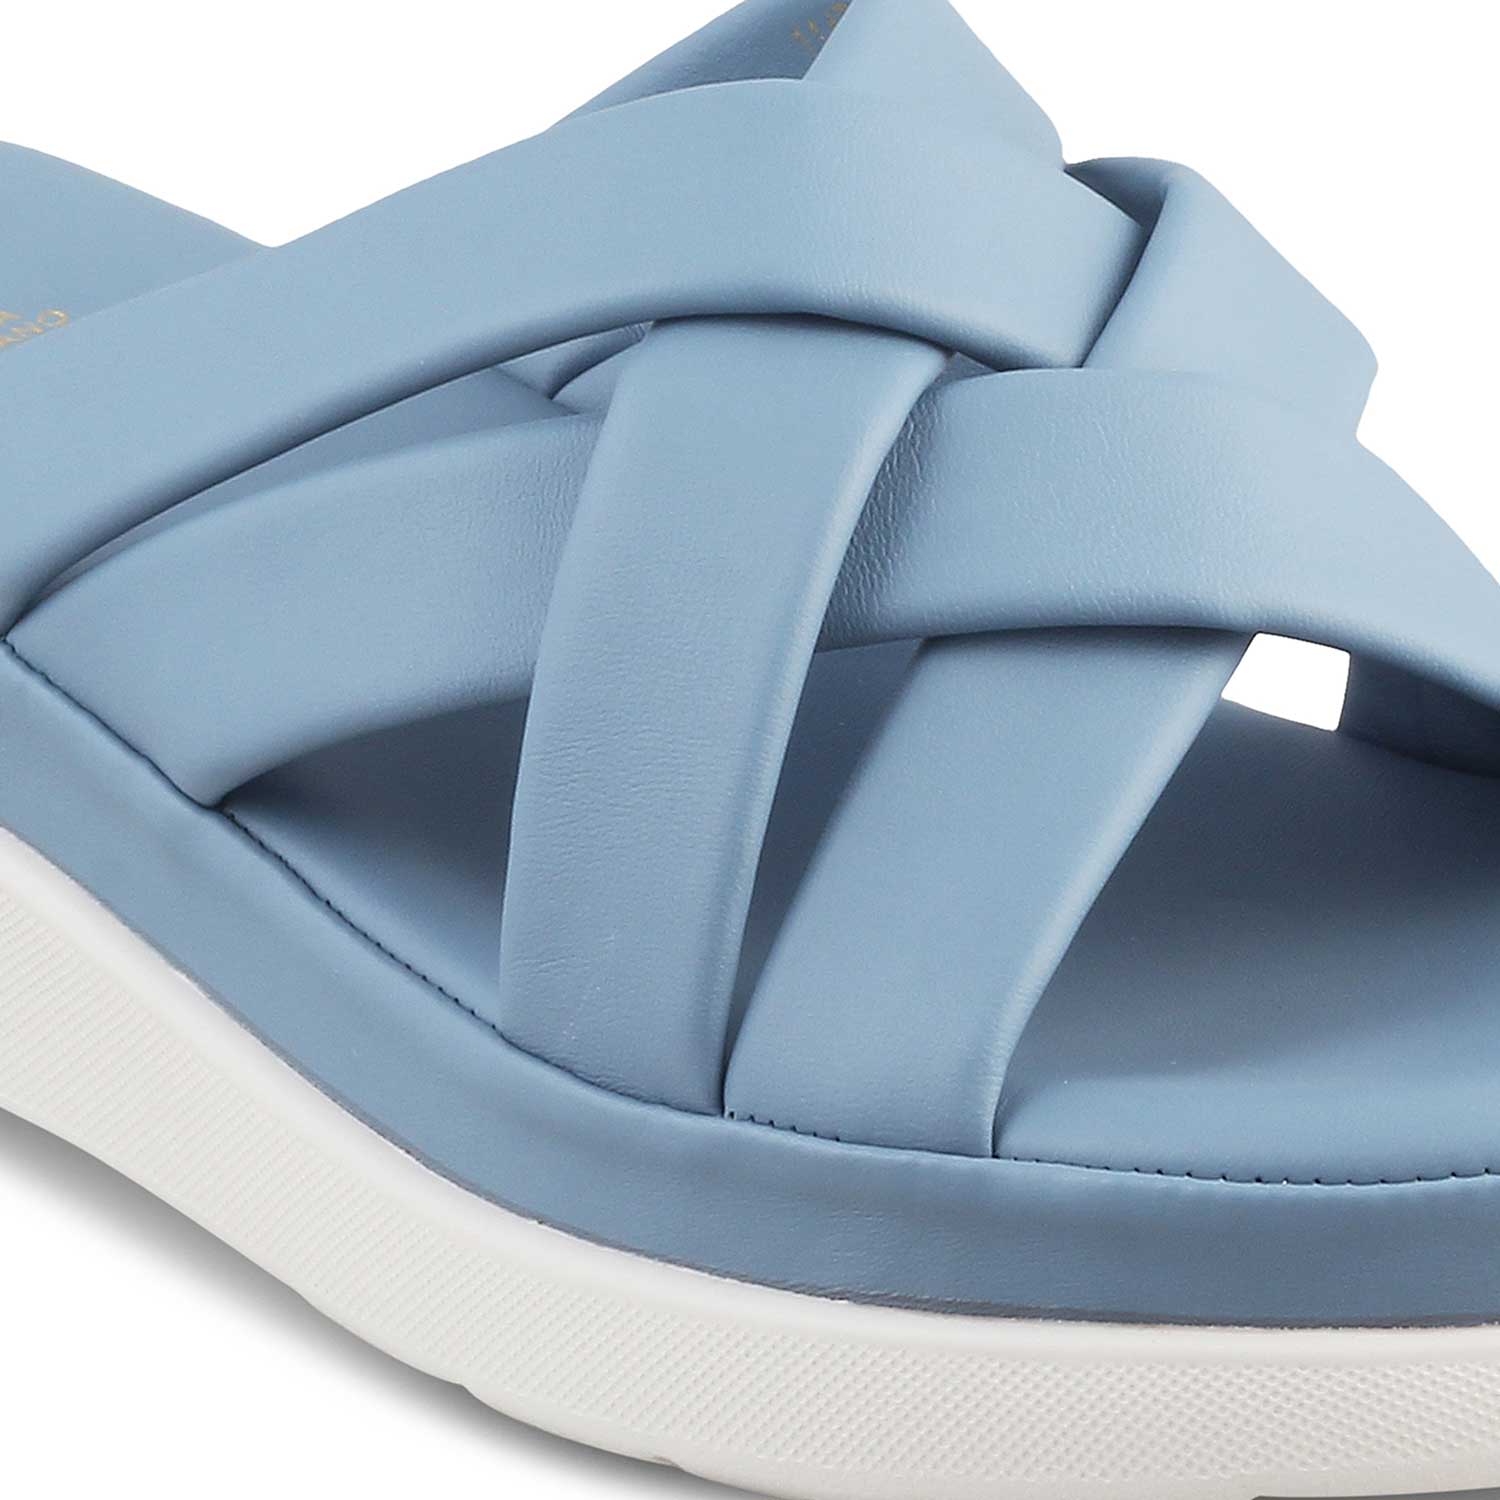 Bree Blue Women's Casual Wedges Online at Tresmode